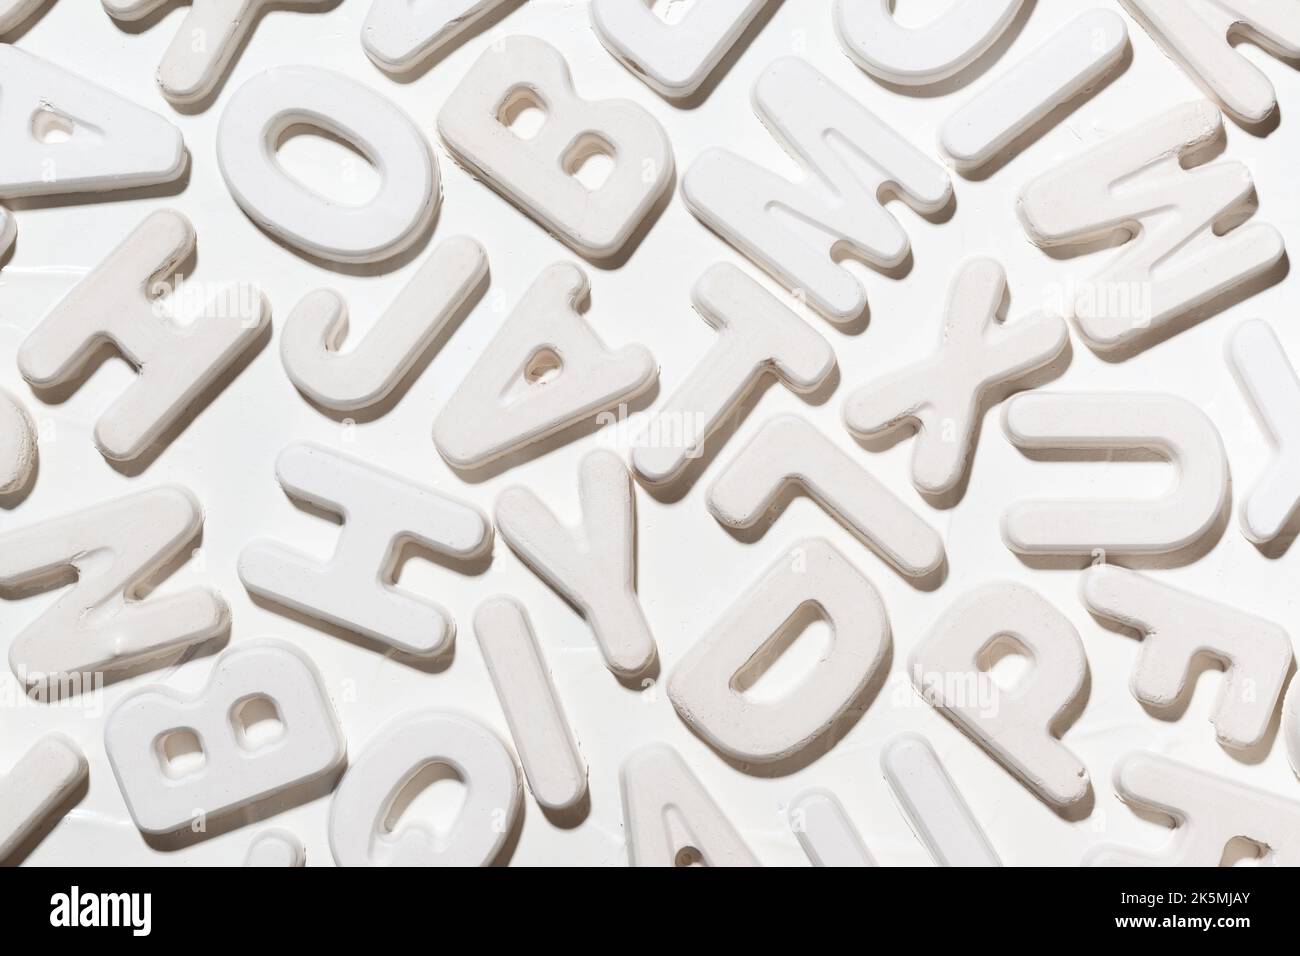 White random Latin letters, may be used as background Stock Photo